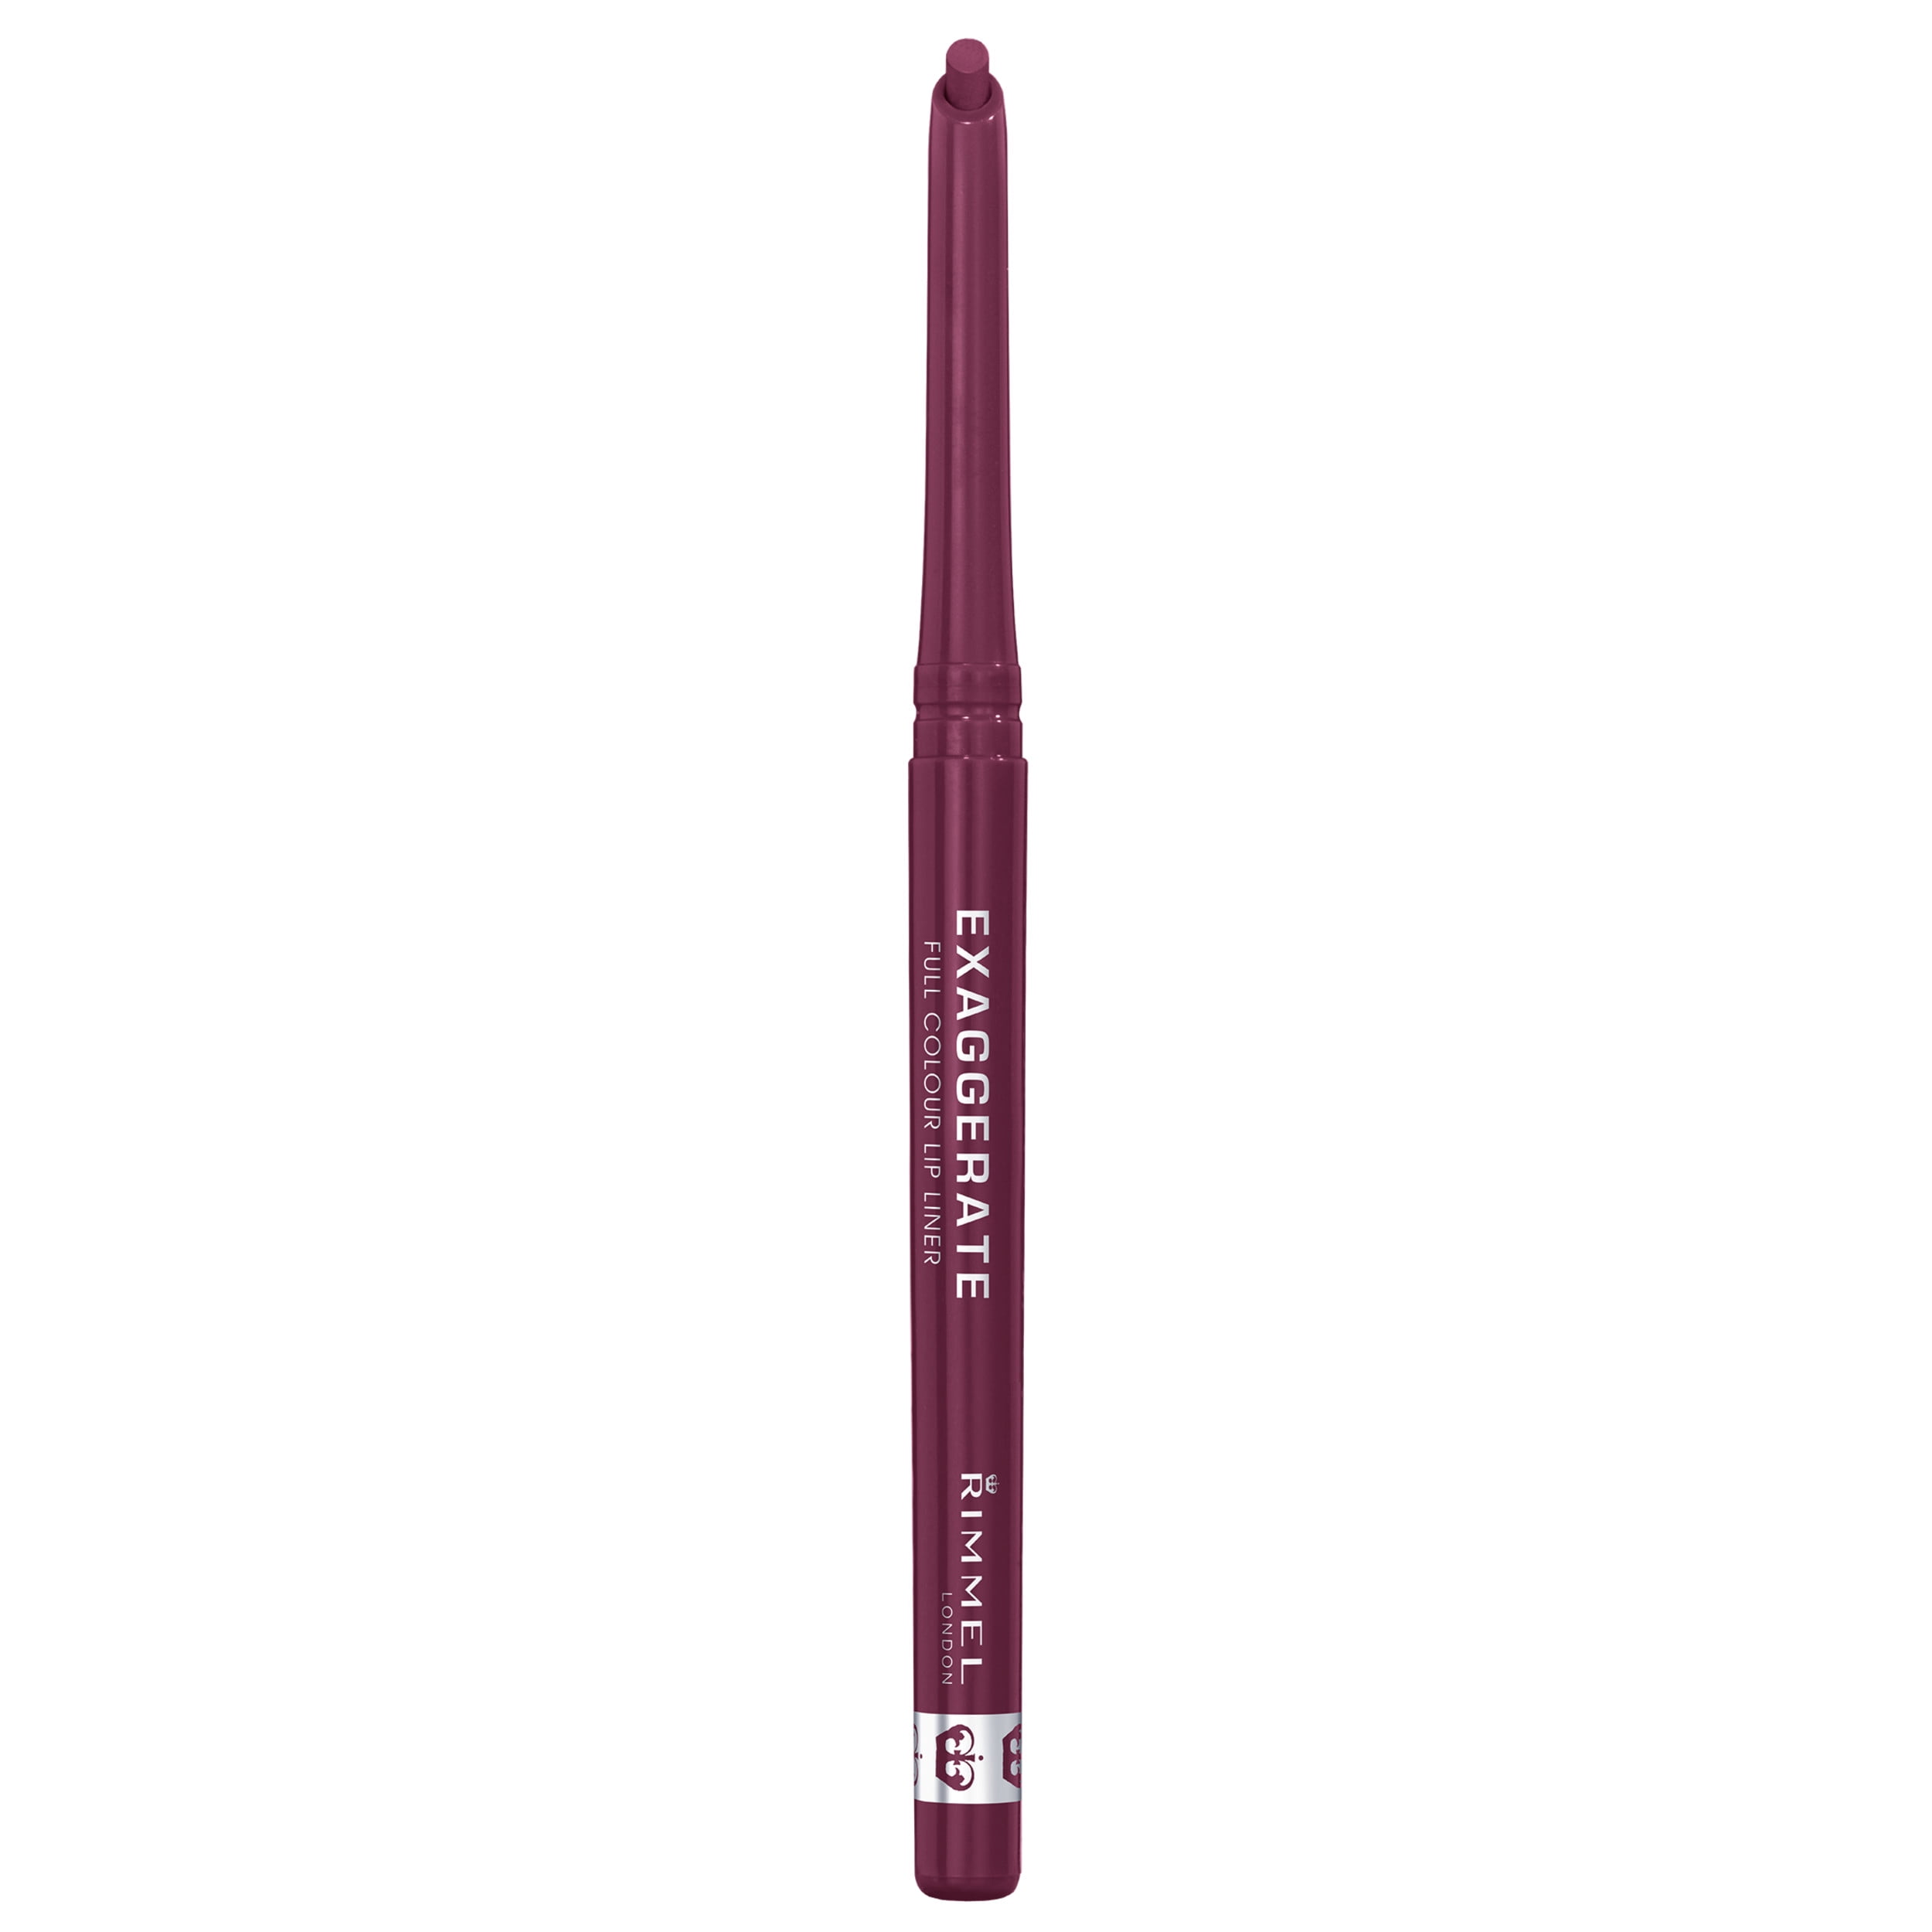 Rimmel London Exaggerate Full Colour Lip Liner, Pink a Punch, 0.008 oz